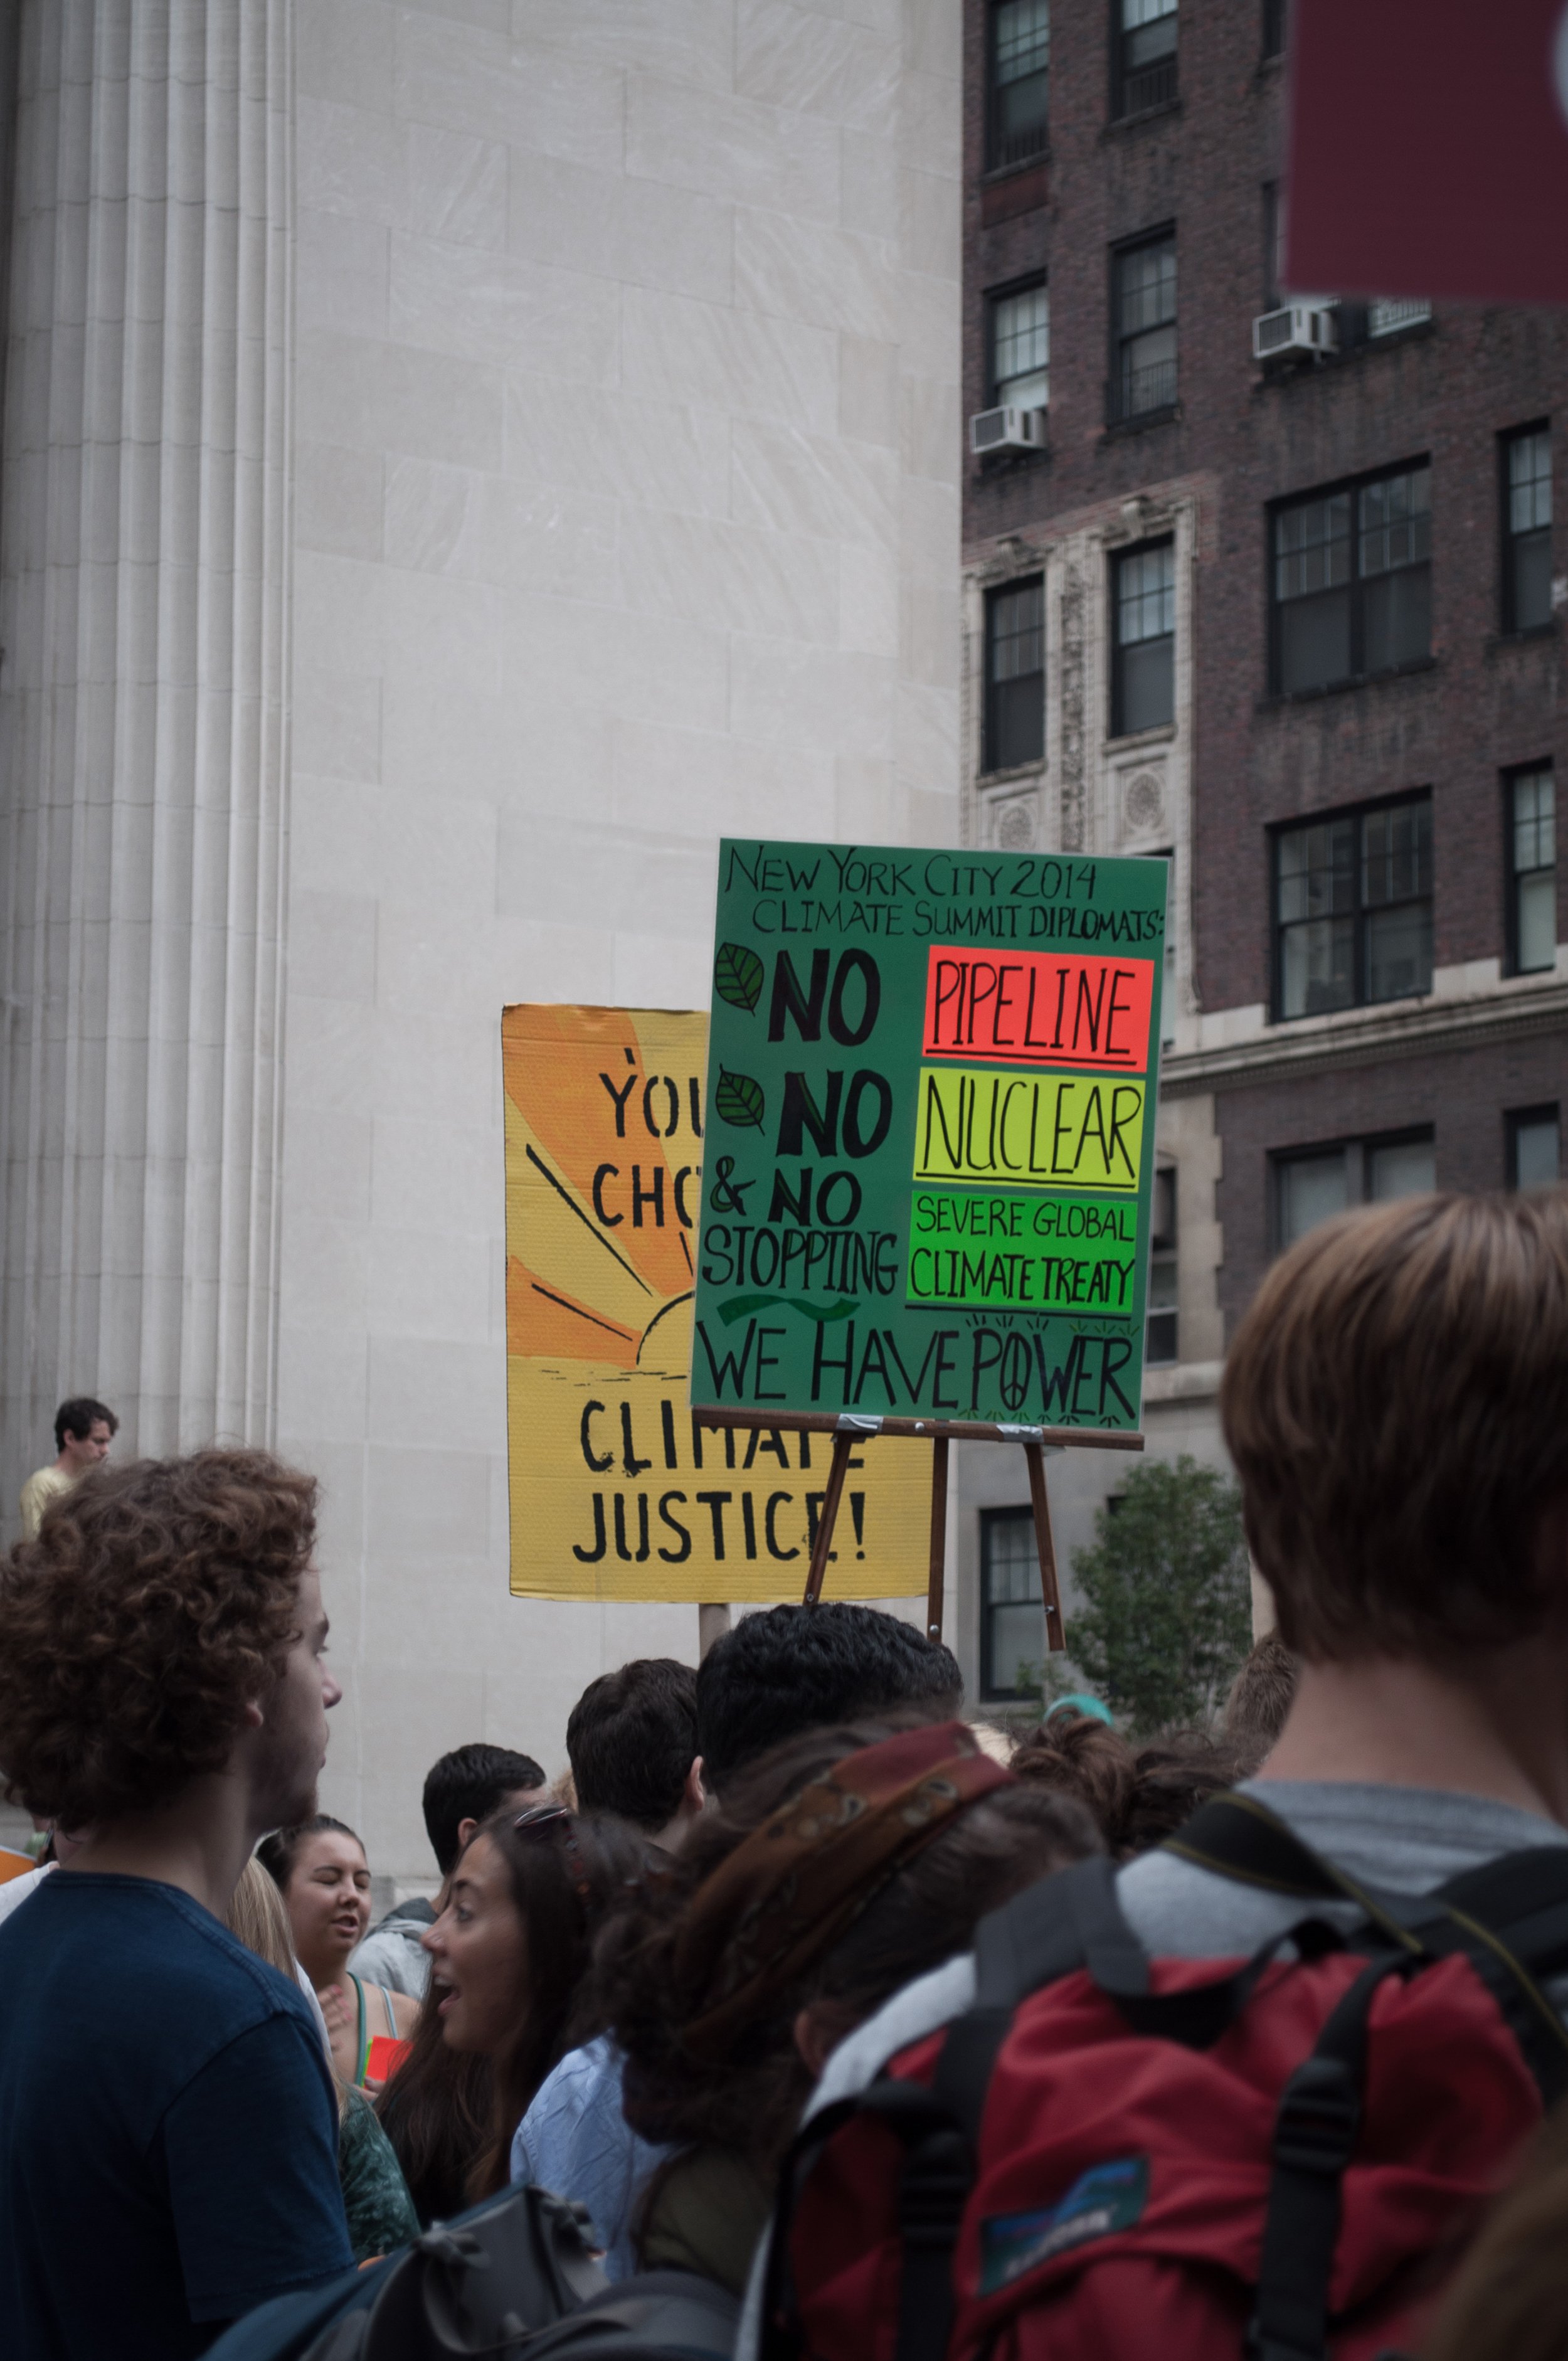   People’s Climate March I.  New York, NY. 2014. 